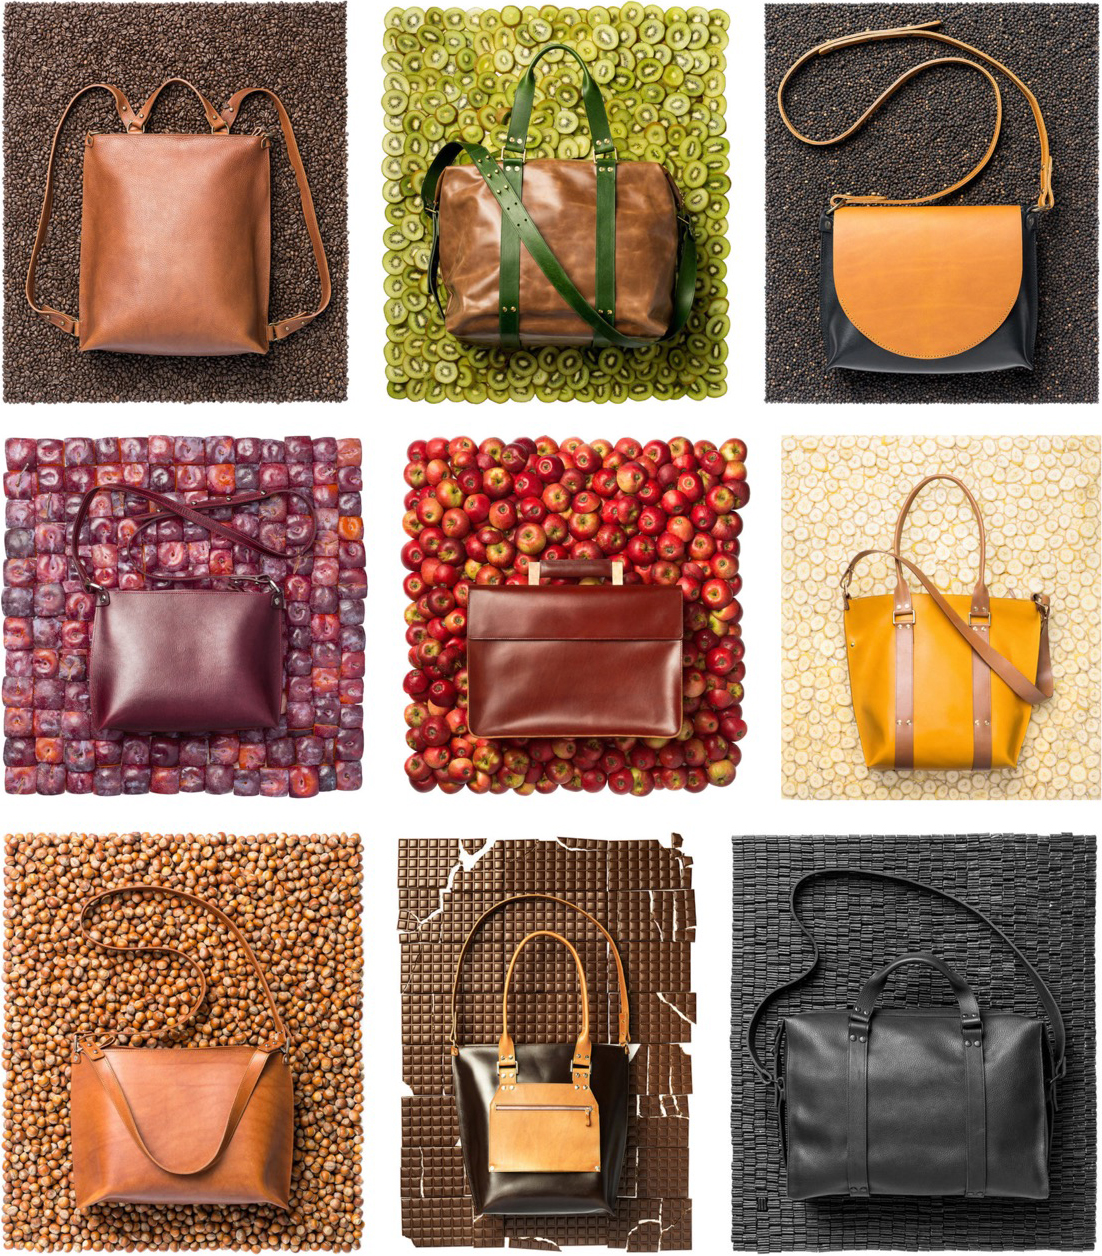 Selection of leather accessories from Stella's collection. Fragment from website. Photos: Renee Altrov